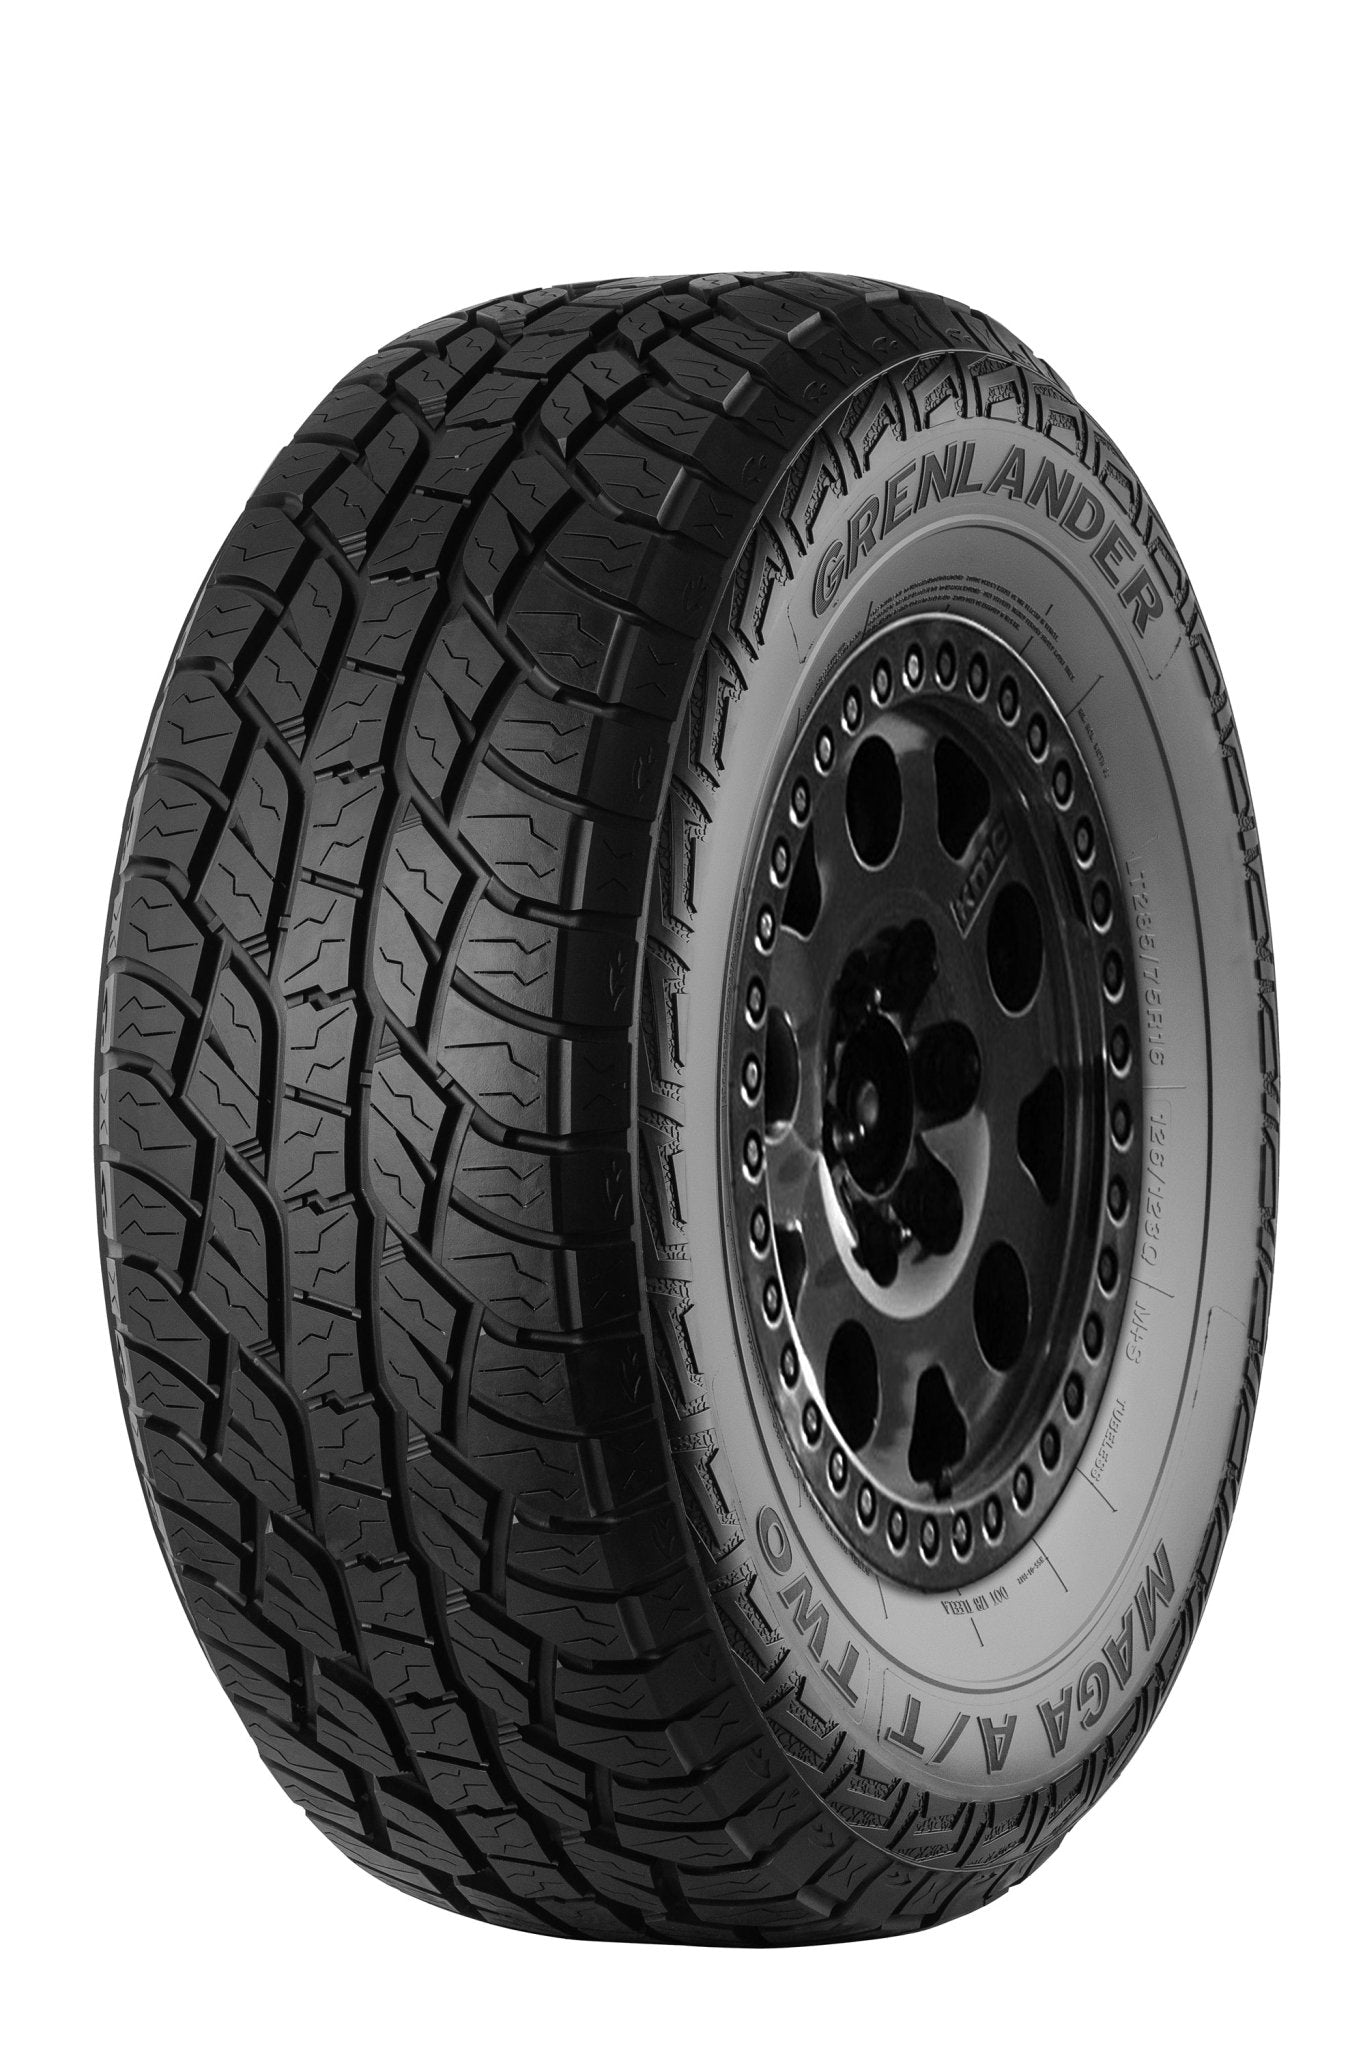 275/55R20 GRENLANDER MAGA A/T TWO PASSENGER - Toee Tire